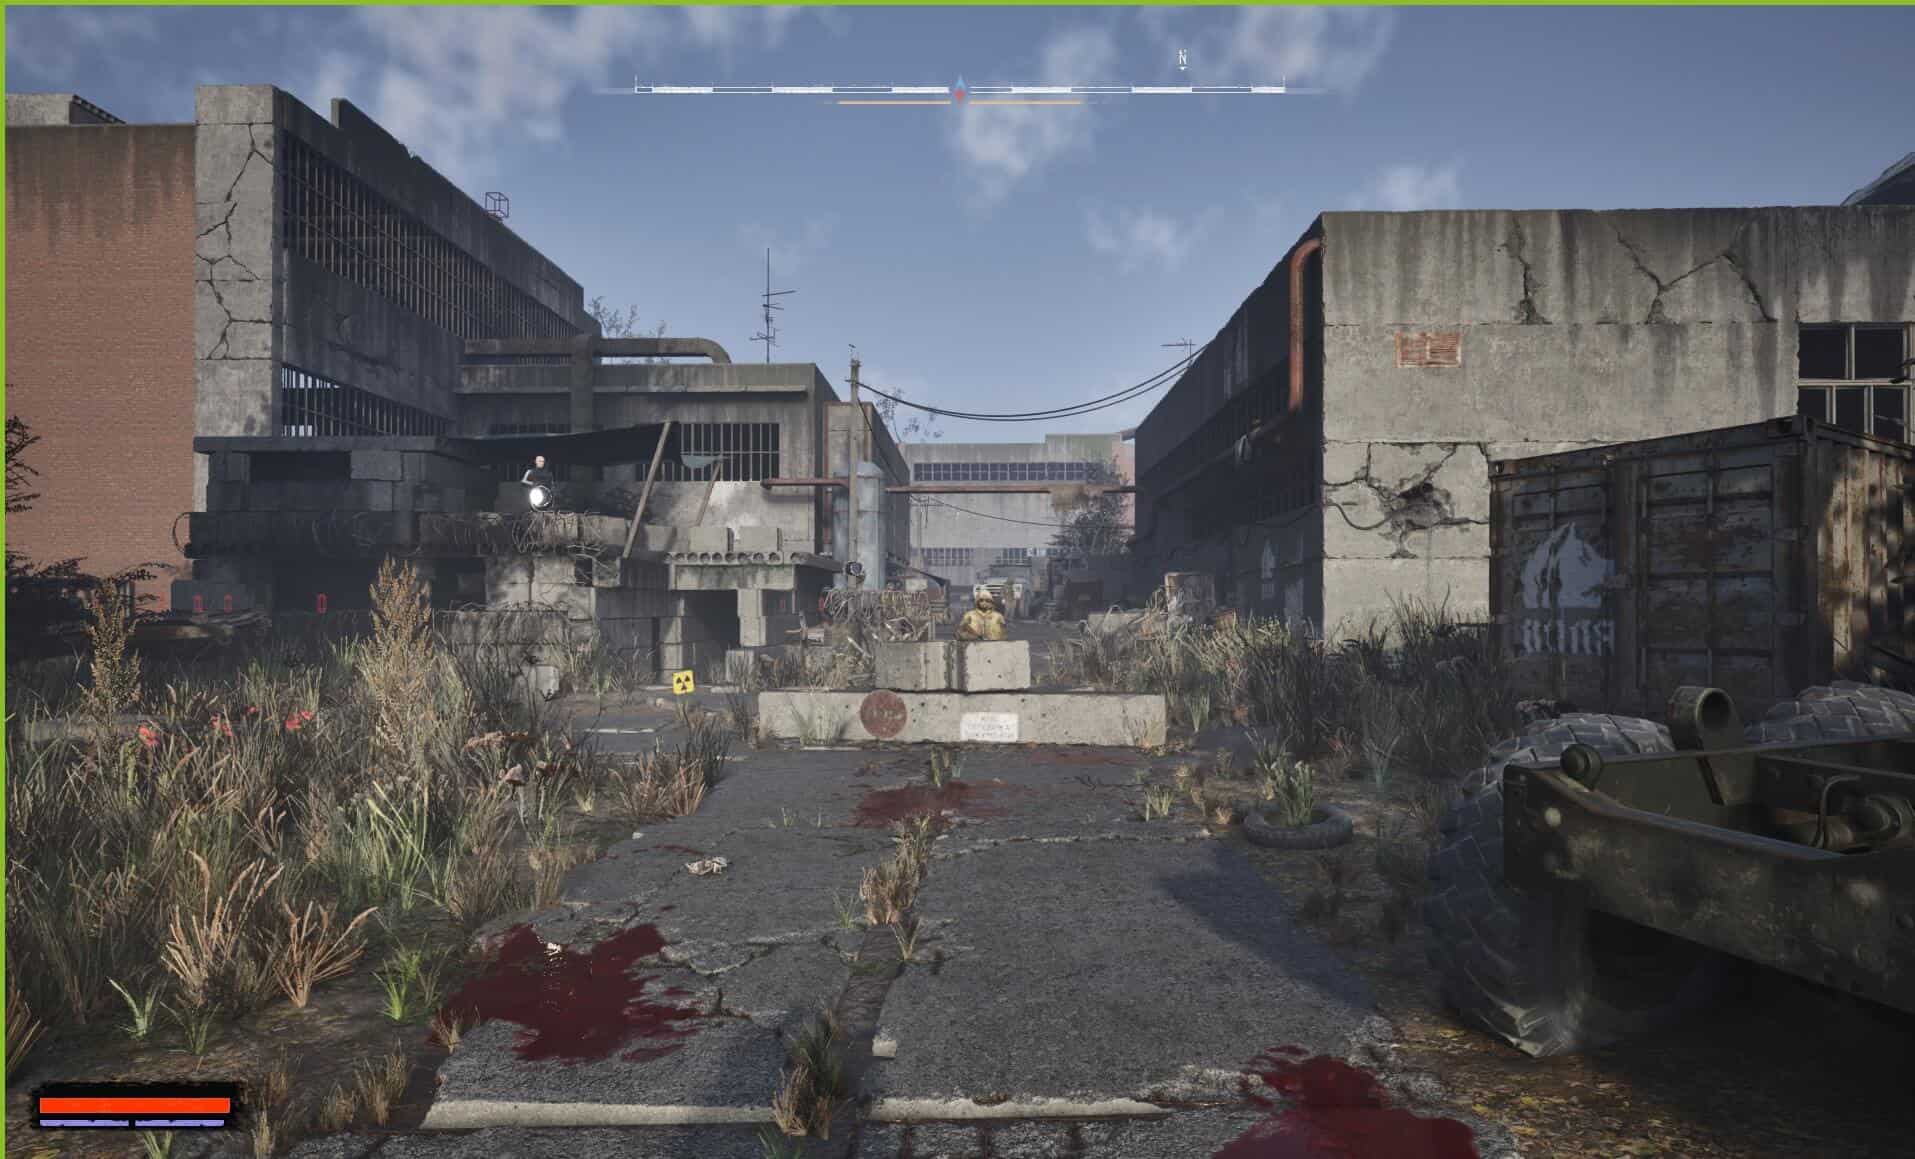 S.T.A.L.K.E.R 2 test footage has leaked online after a year and a half” of  hacker attacks